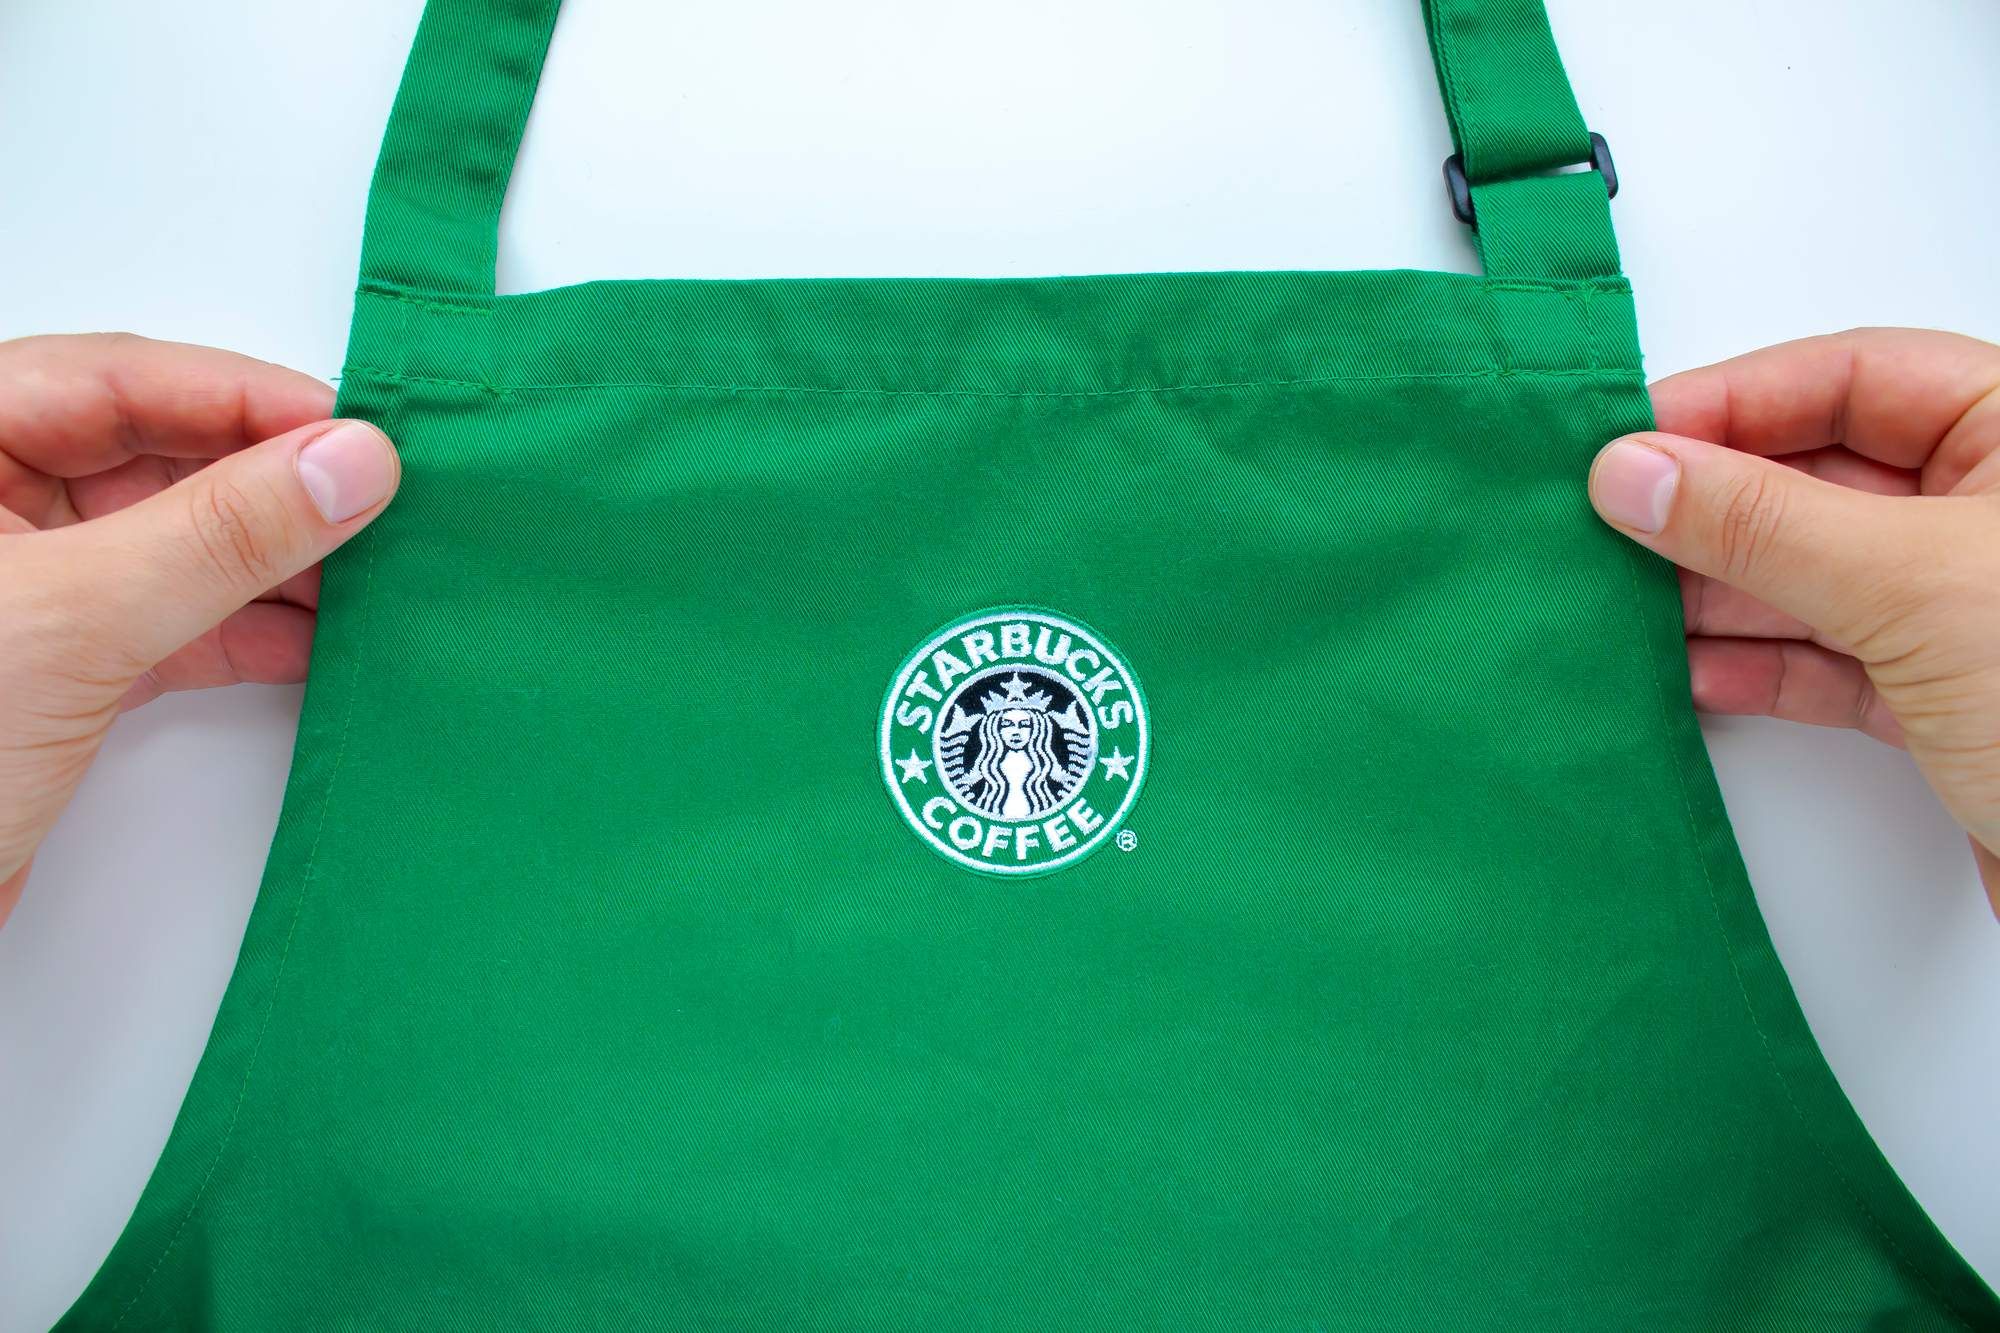 Starbucks Class Action Lawsuit Claims Systemic Misclassification of